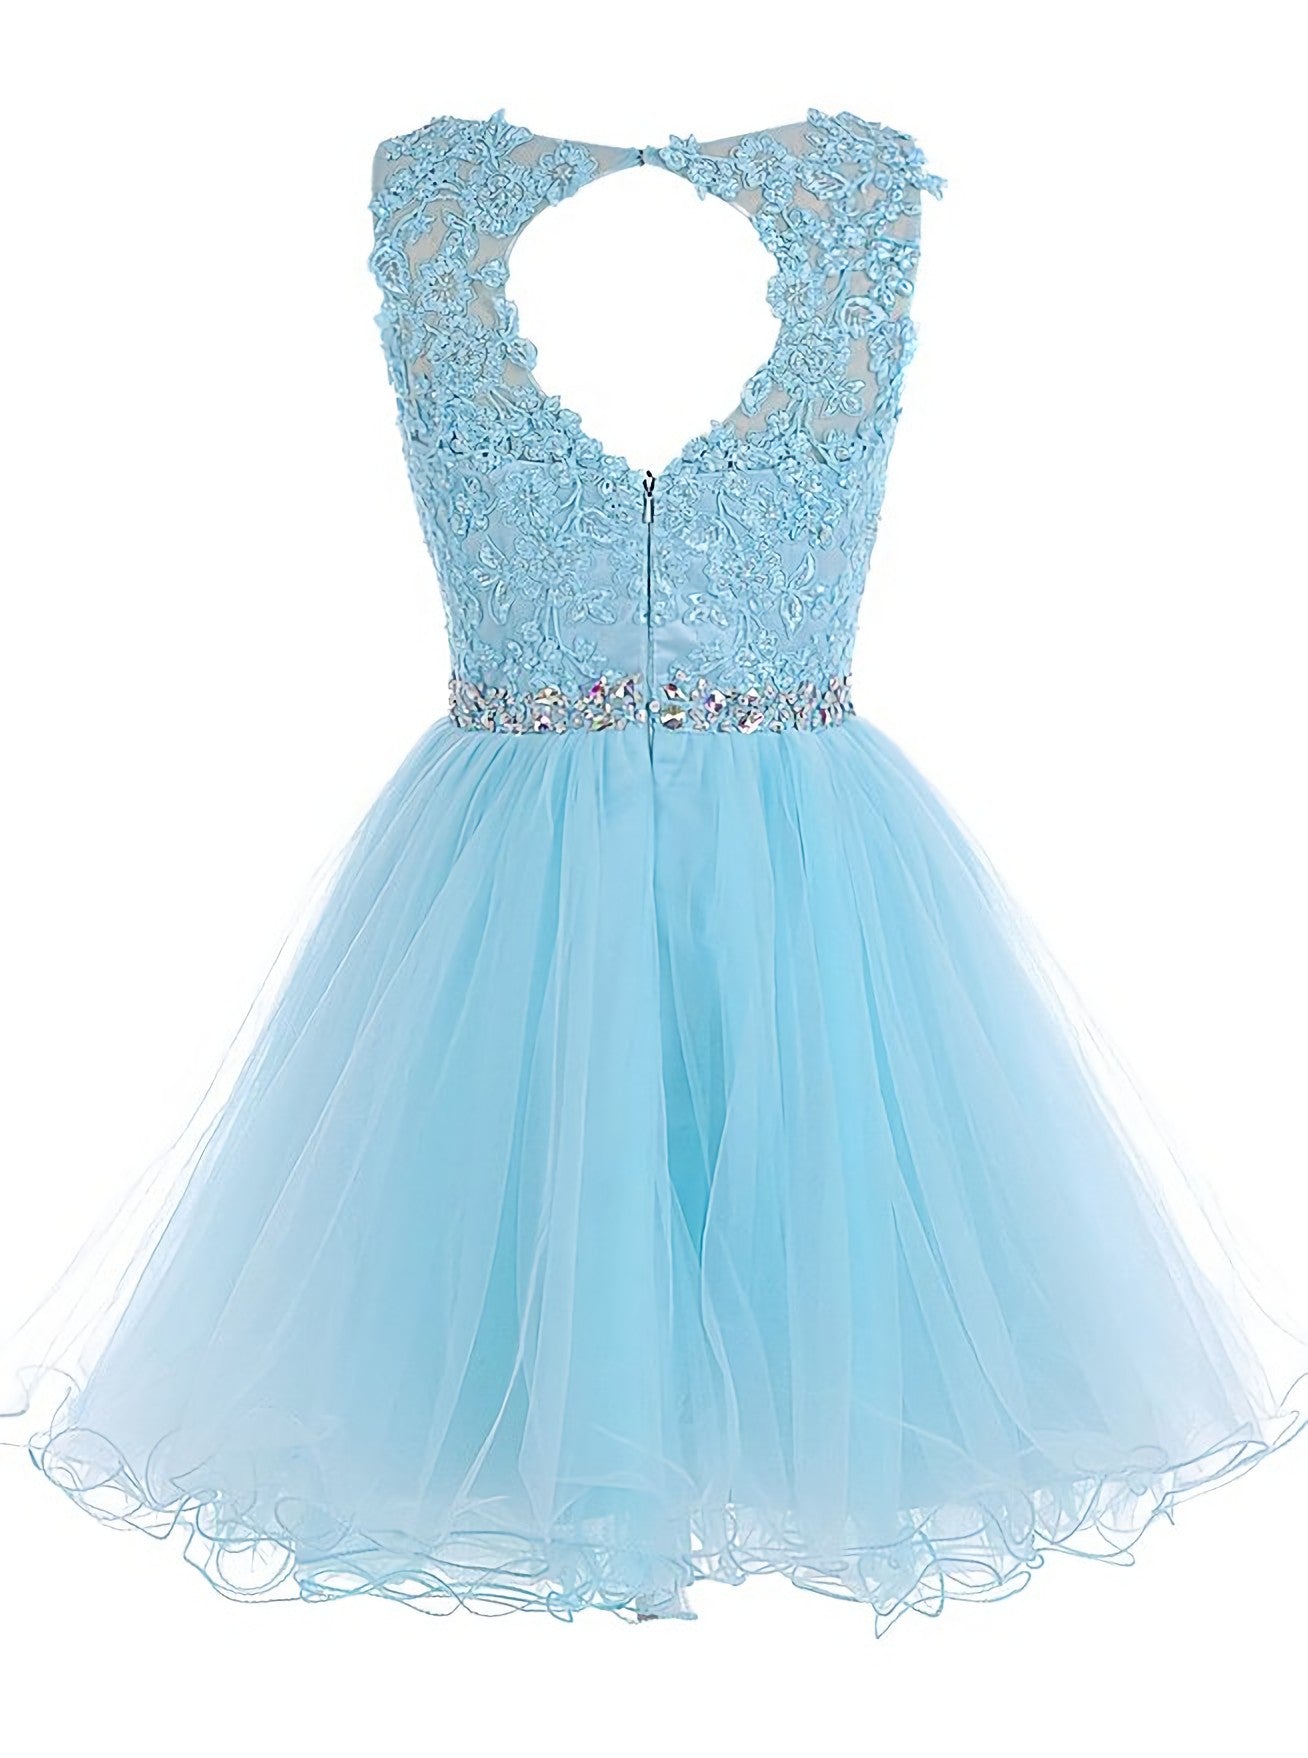 Prom Dresses Near Me, Lace Blue Fitted Short Cute Sweet 16 For Teens Homecoming Dresses